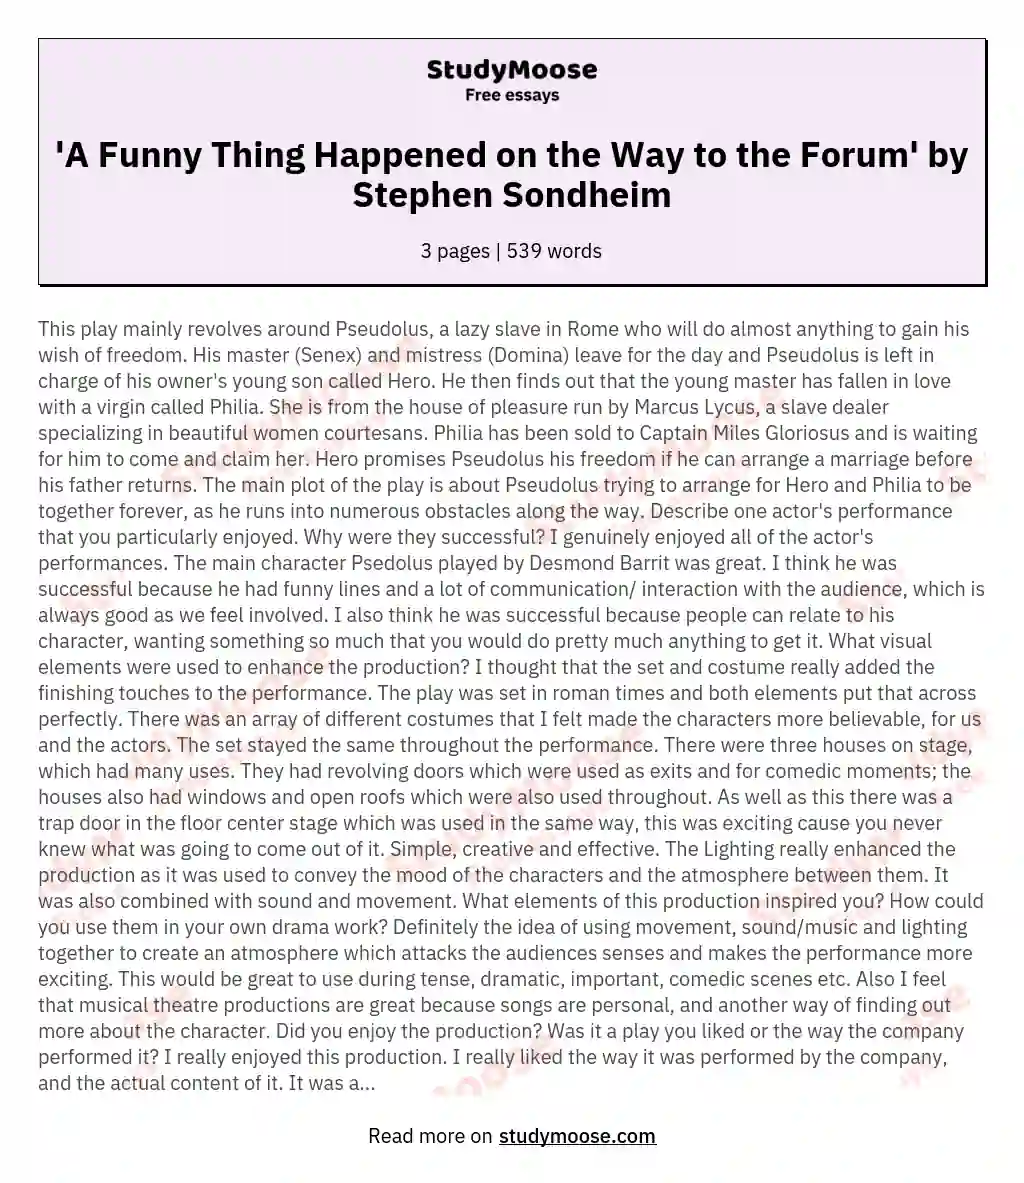 'A Funny Thing Happened on the Way to the Forum' by Stephen Sondheim essay